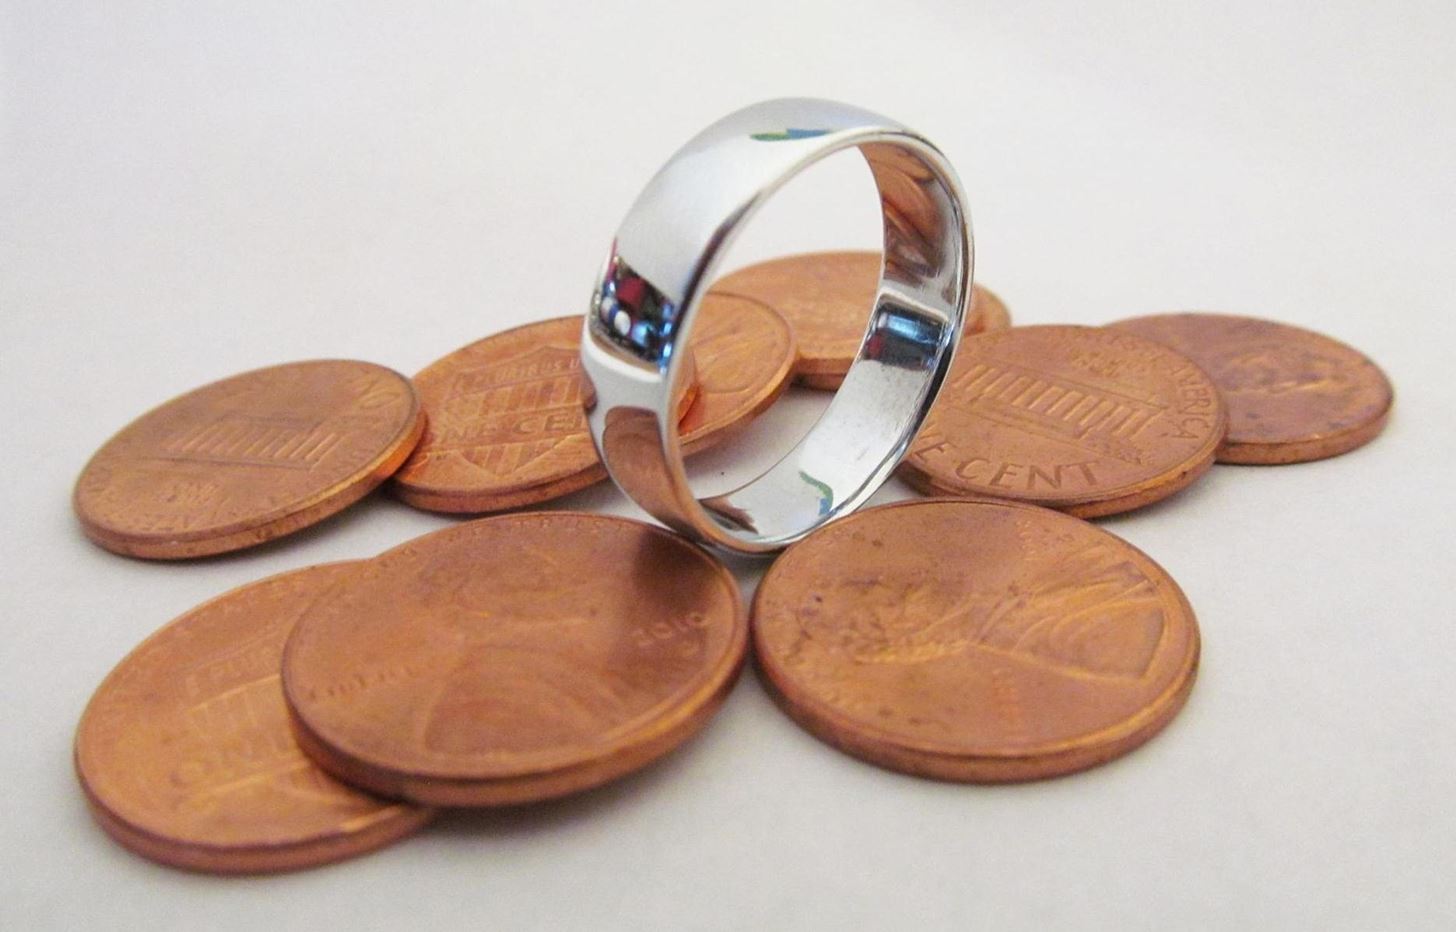 How to Smelt Your Loose Change into Well-Fitting Penny Rings